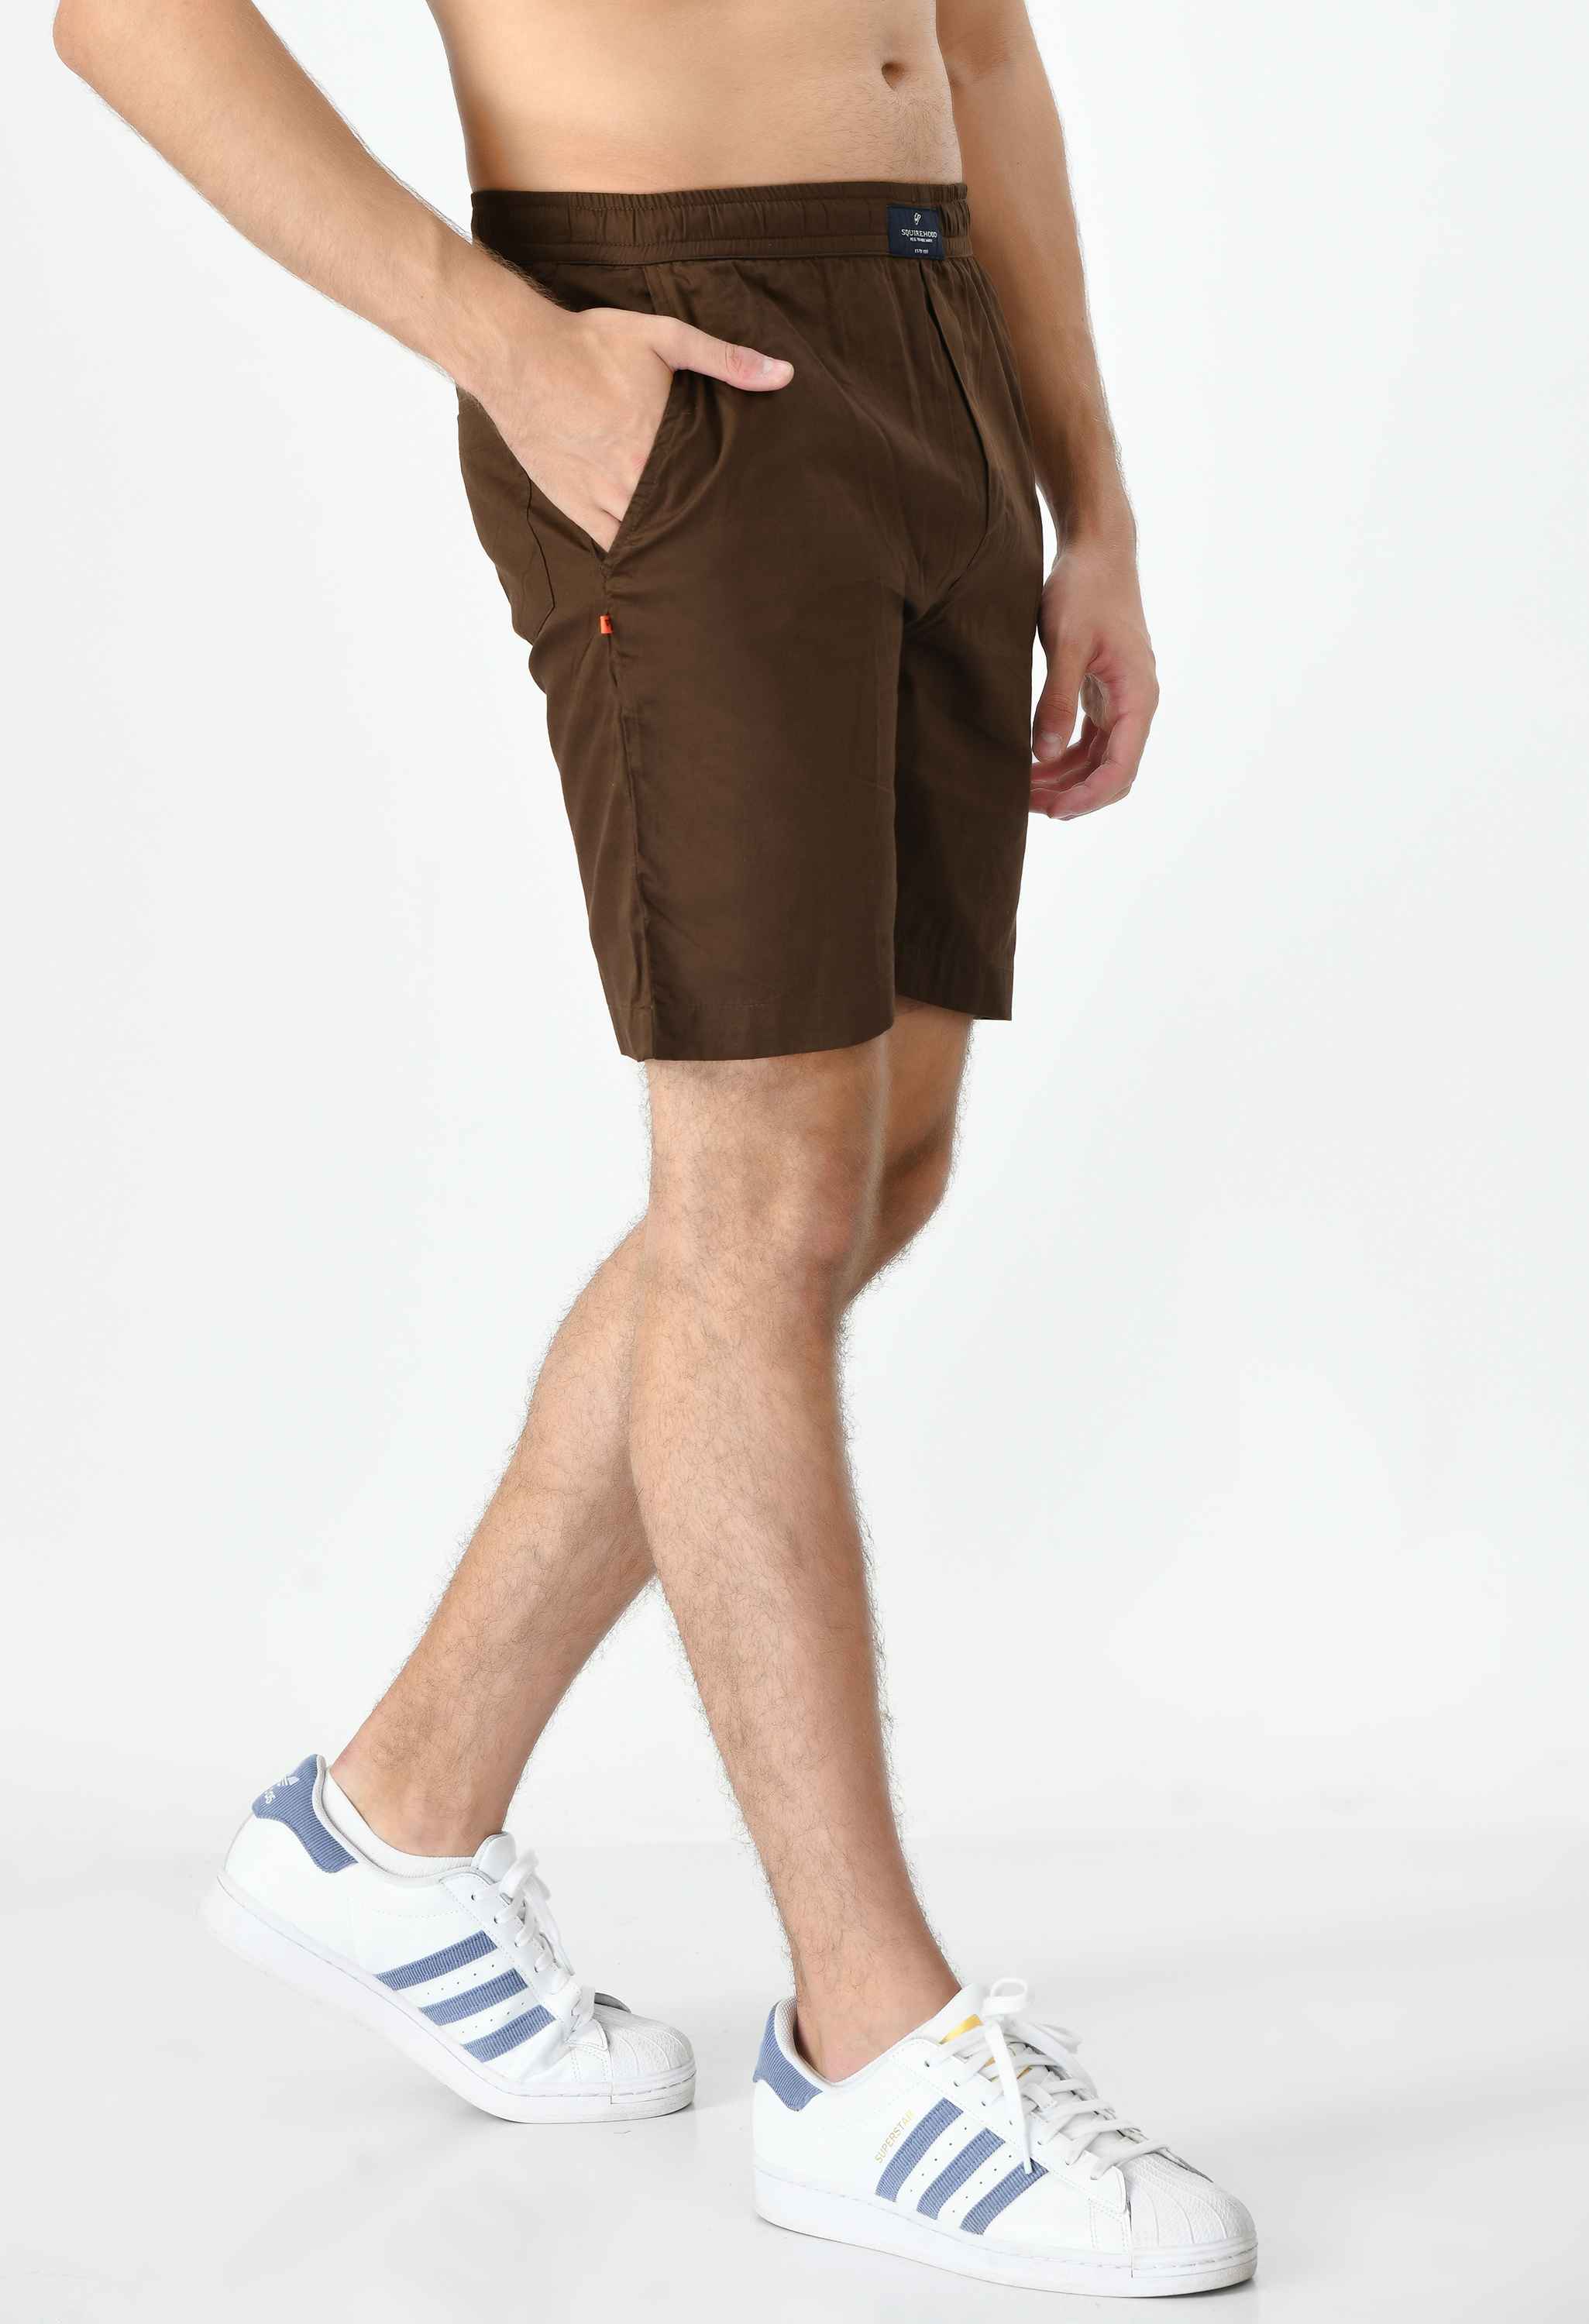 Men's Cotton Twill Solid Boxer with Side Pocket - Brown